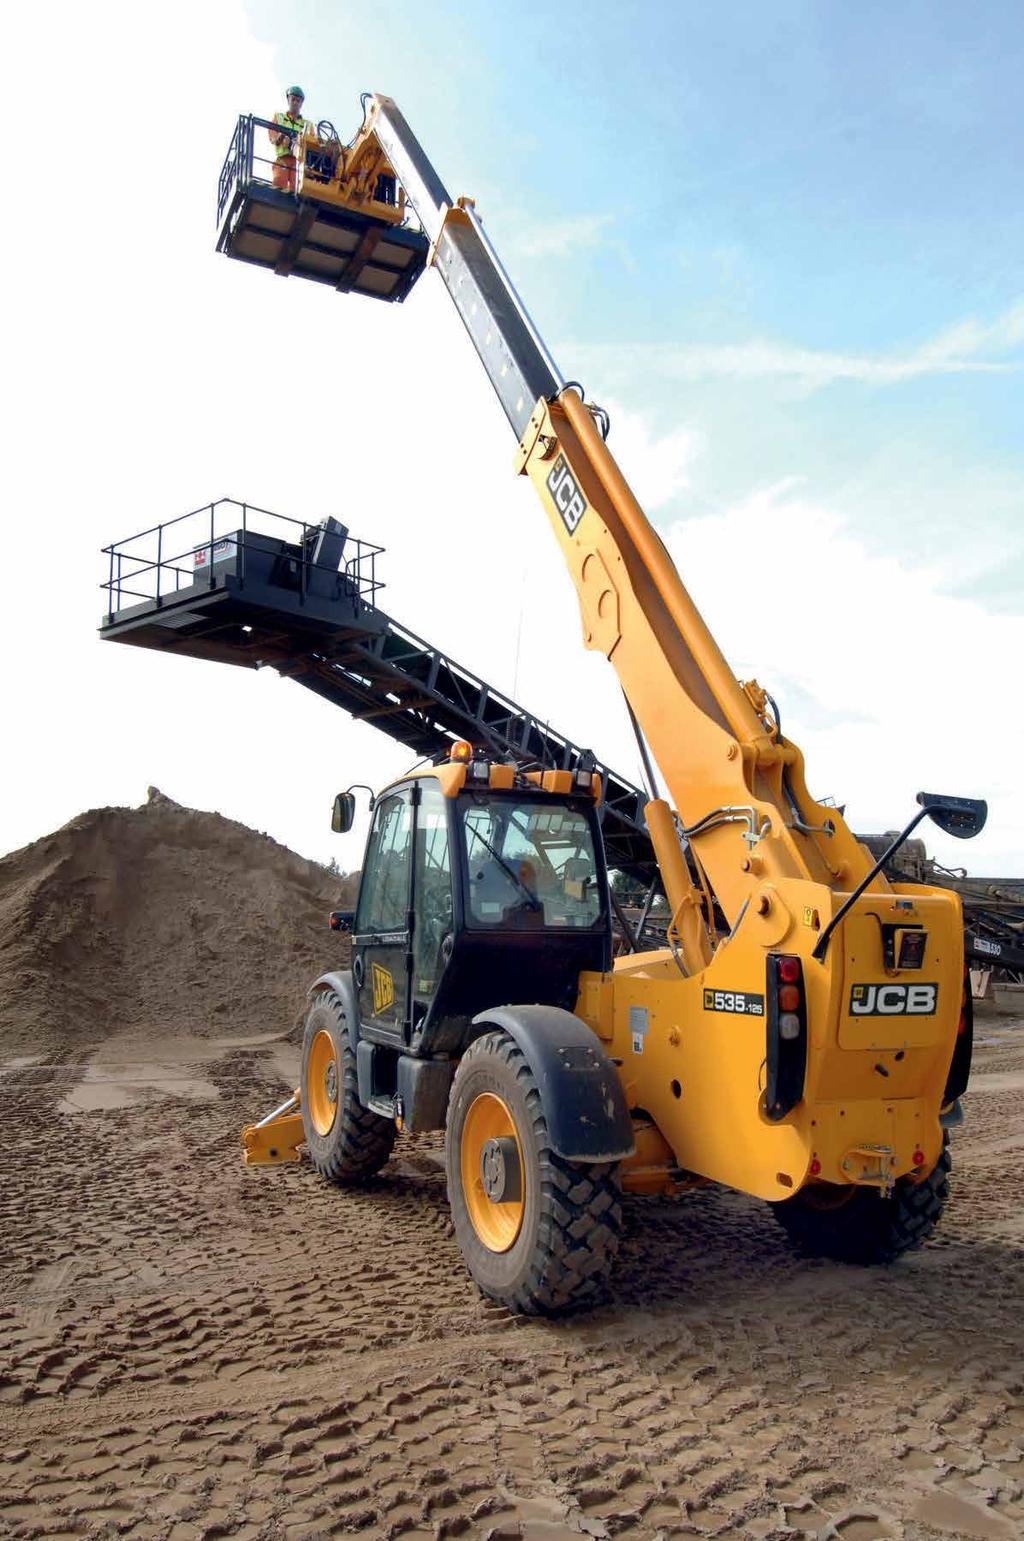 Centralised lift and displacement rams ensure load stresses are evenly distributed. Tough boom design.